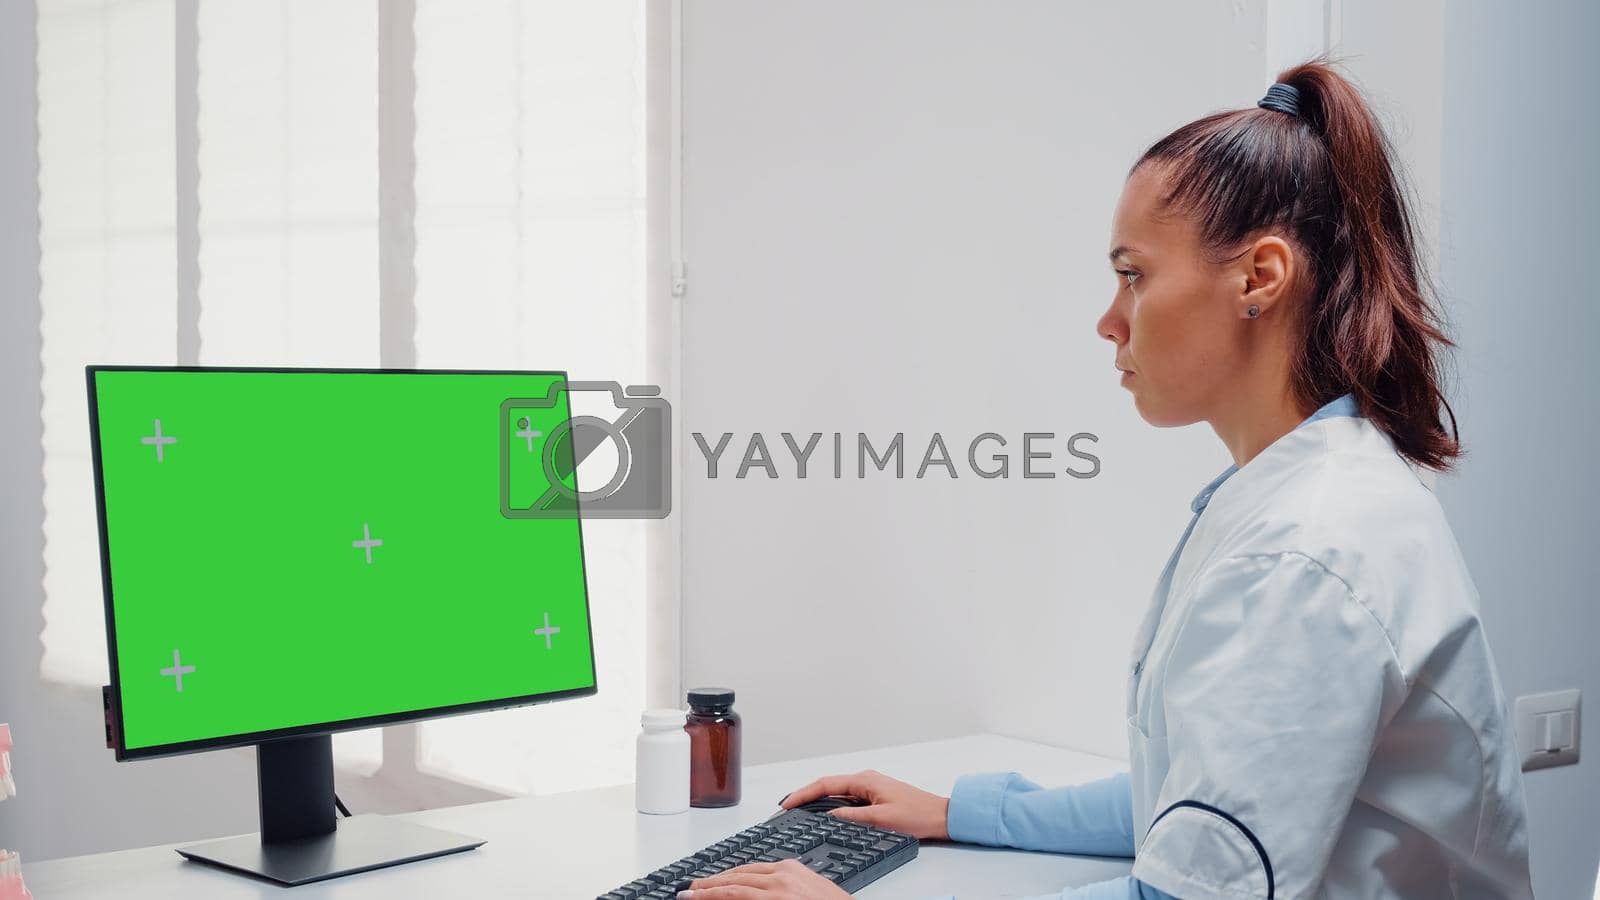 Dentist working with horizontal green screen on computer for teethcare at dental office. Woman using keyboard and monitor with chroma key for mockup template and isolated background